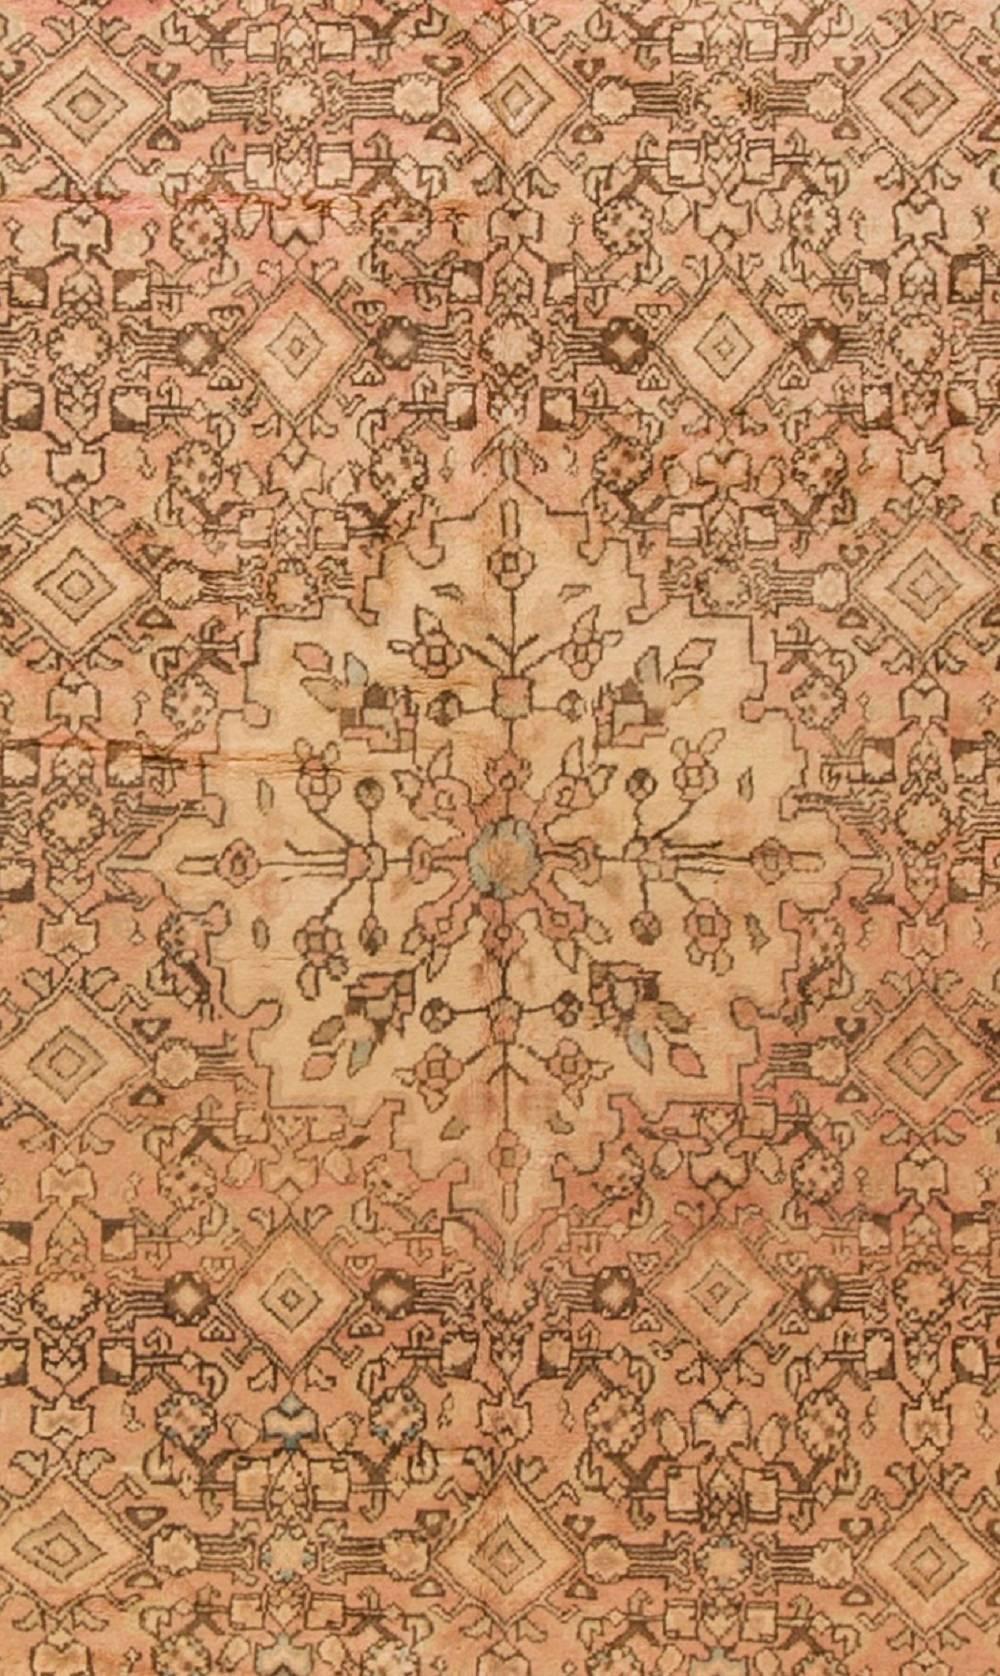 The soft blush colors in the field are complimented so well by the deep black border and coupled with the size of the rug make it most sought after and will be a proud addition to any home. Tabriz is the capital of the north-western province of